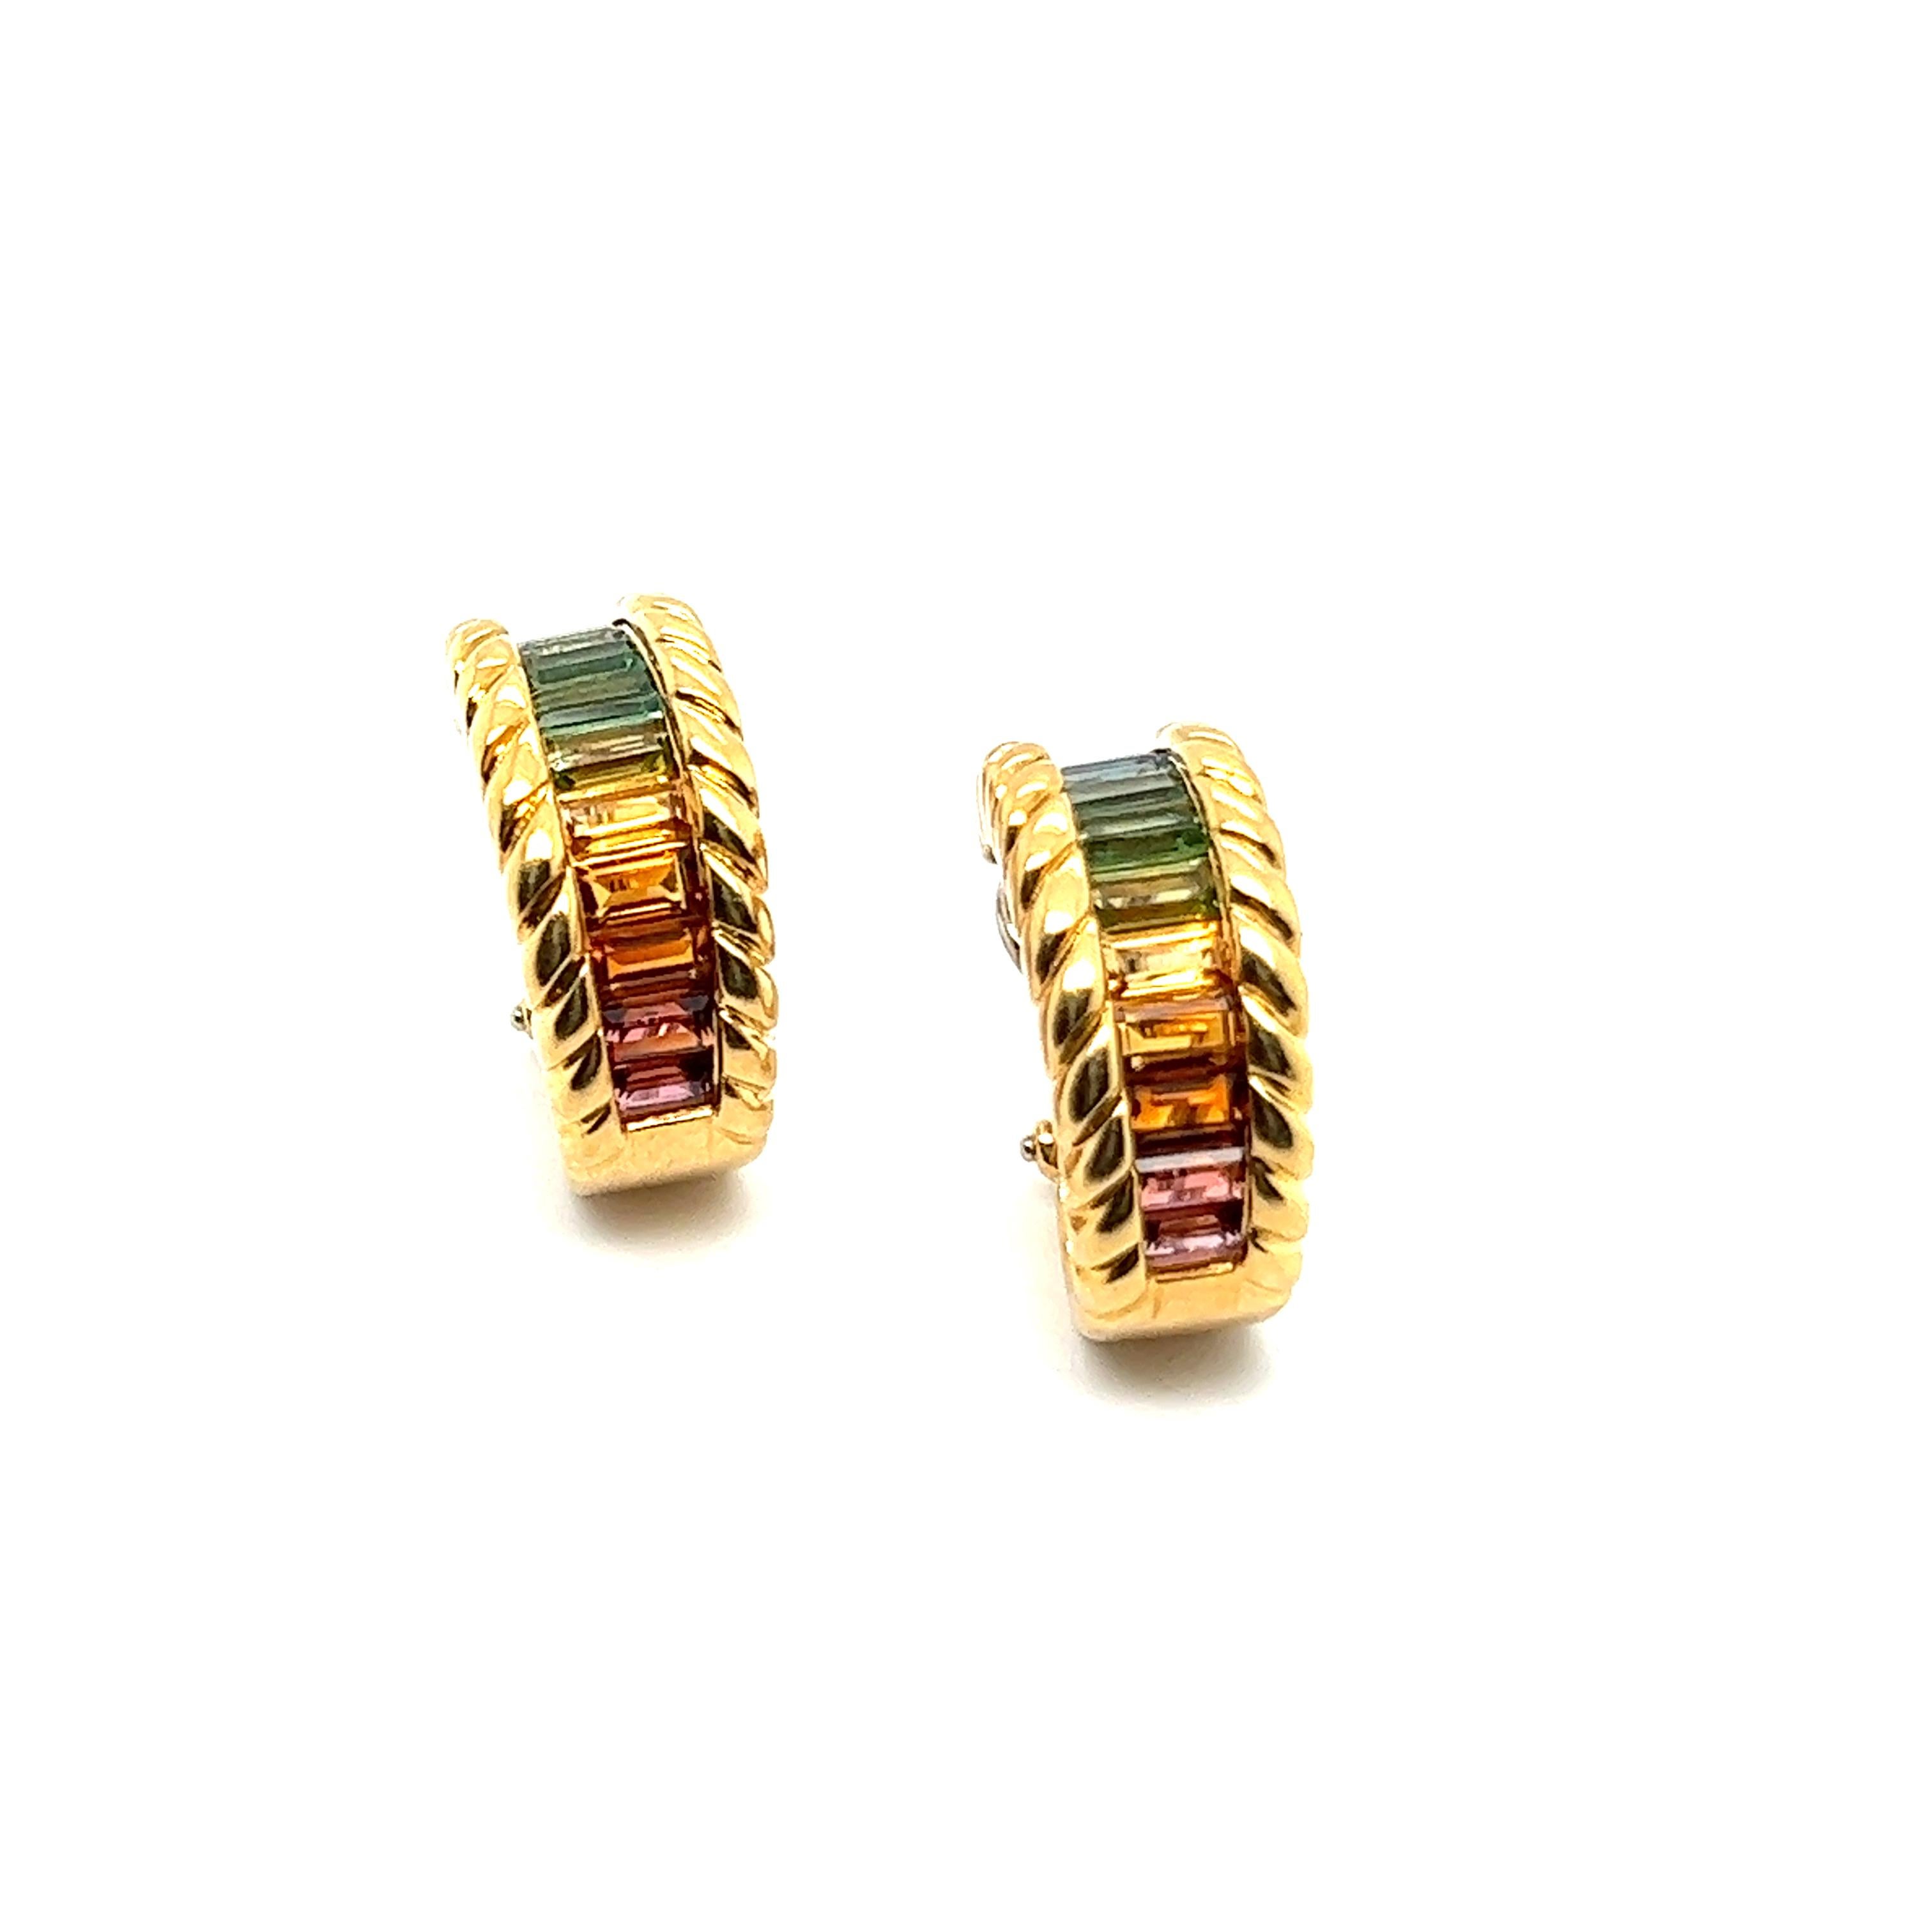 Introducing  exquisite earrings with rainbow gemstones in 18 Karat yellow gold by Gübelin. 

This colorful piece seamlessly fuses modern design with the enchanting allure of 22 baguette-cut rainbow gems. Tourmaline, aquamarine, amethyst, citrine -